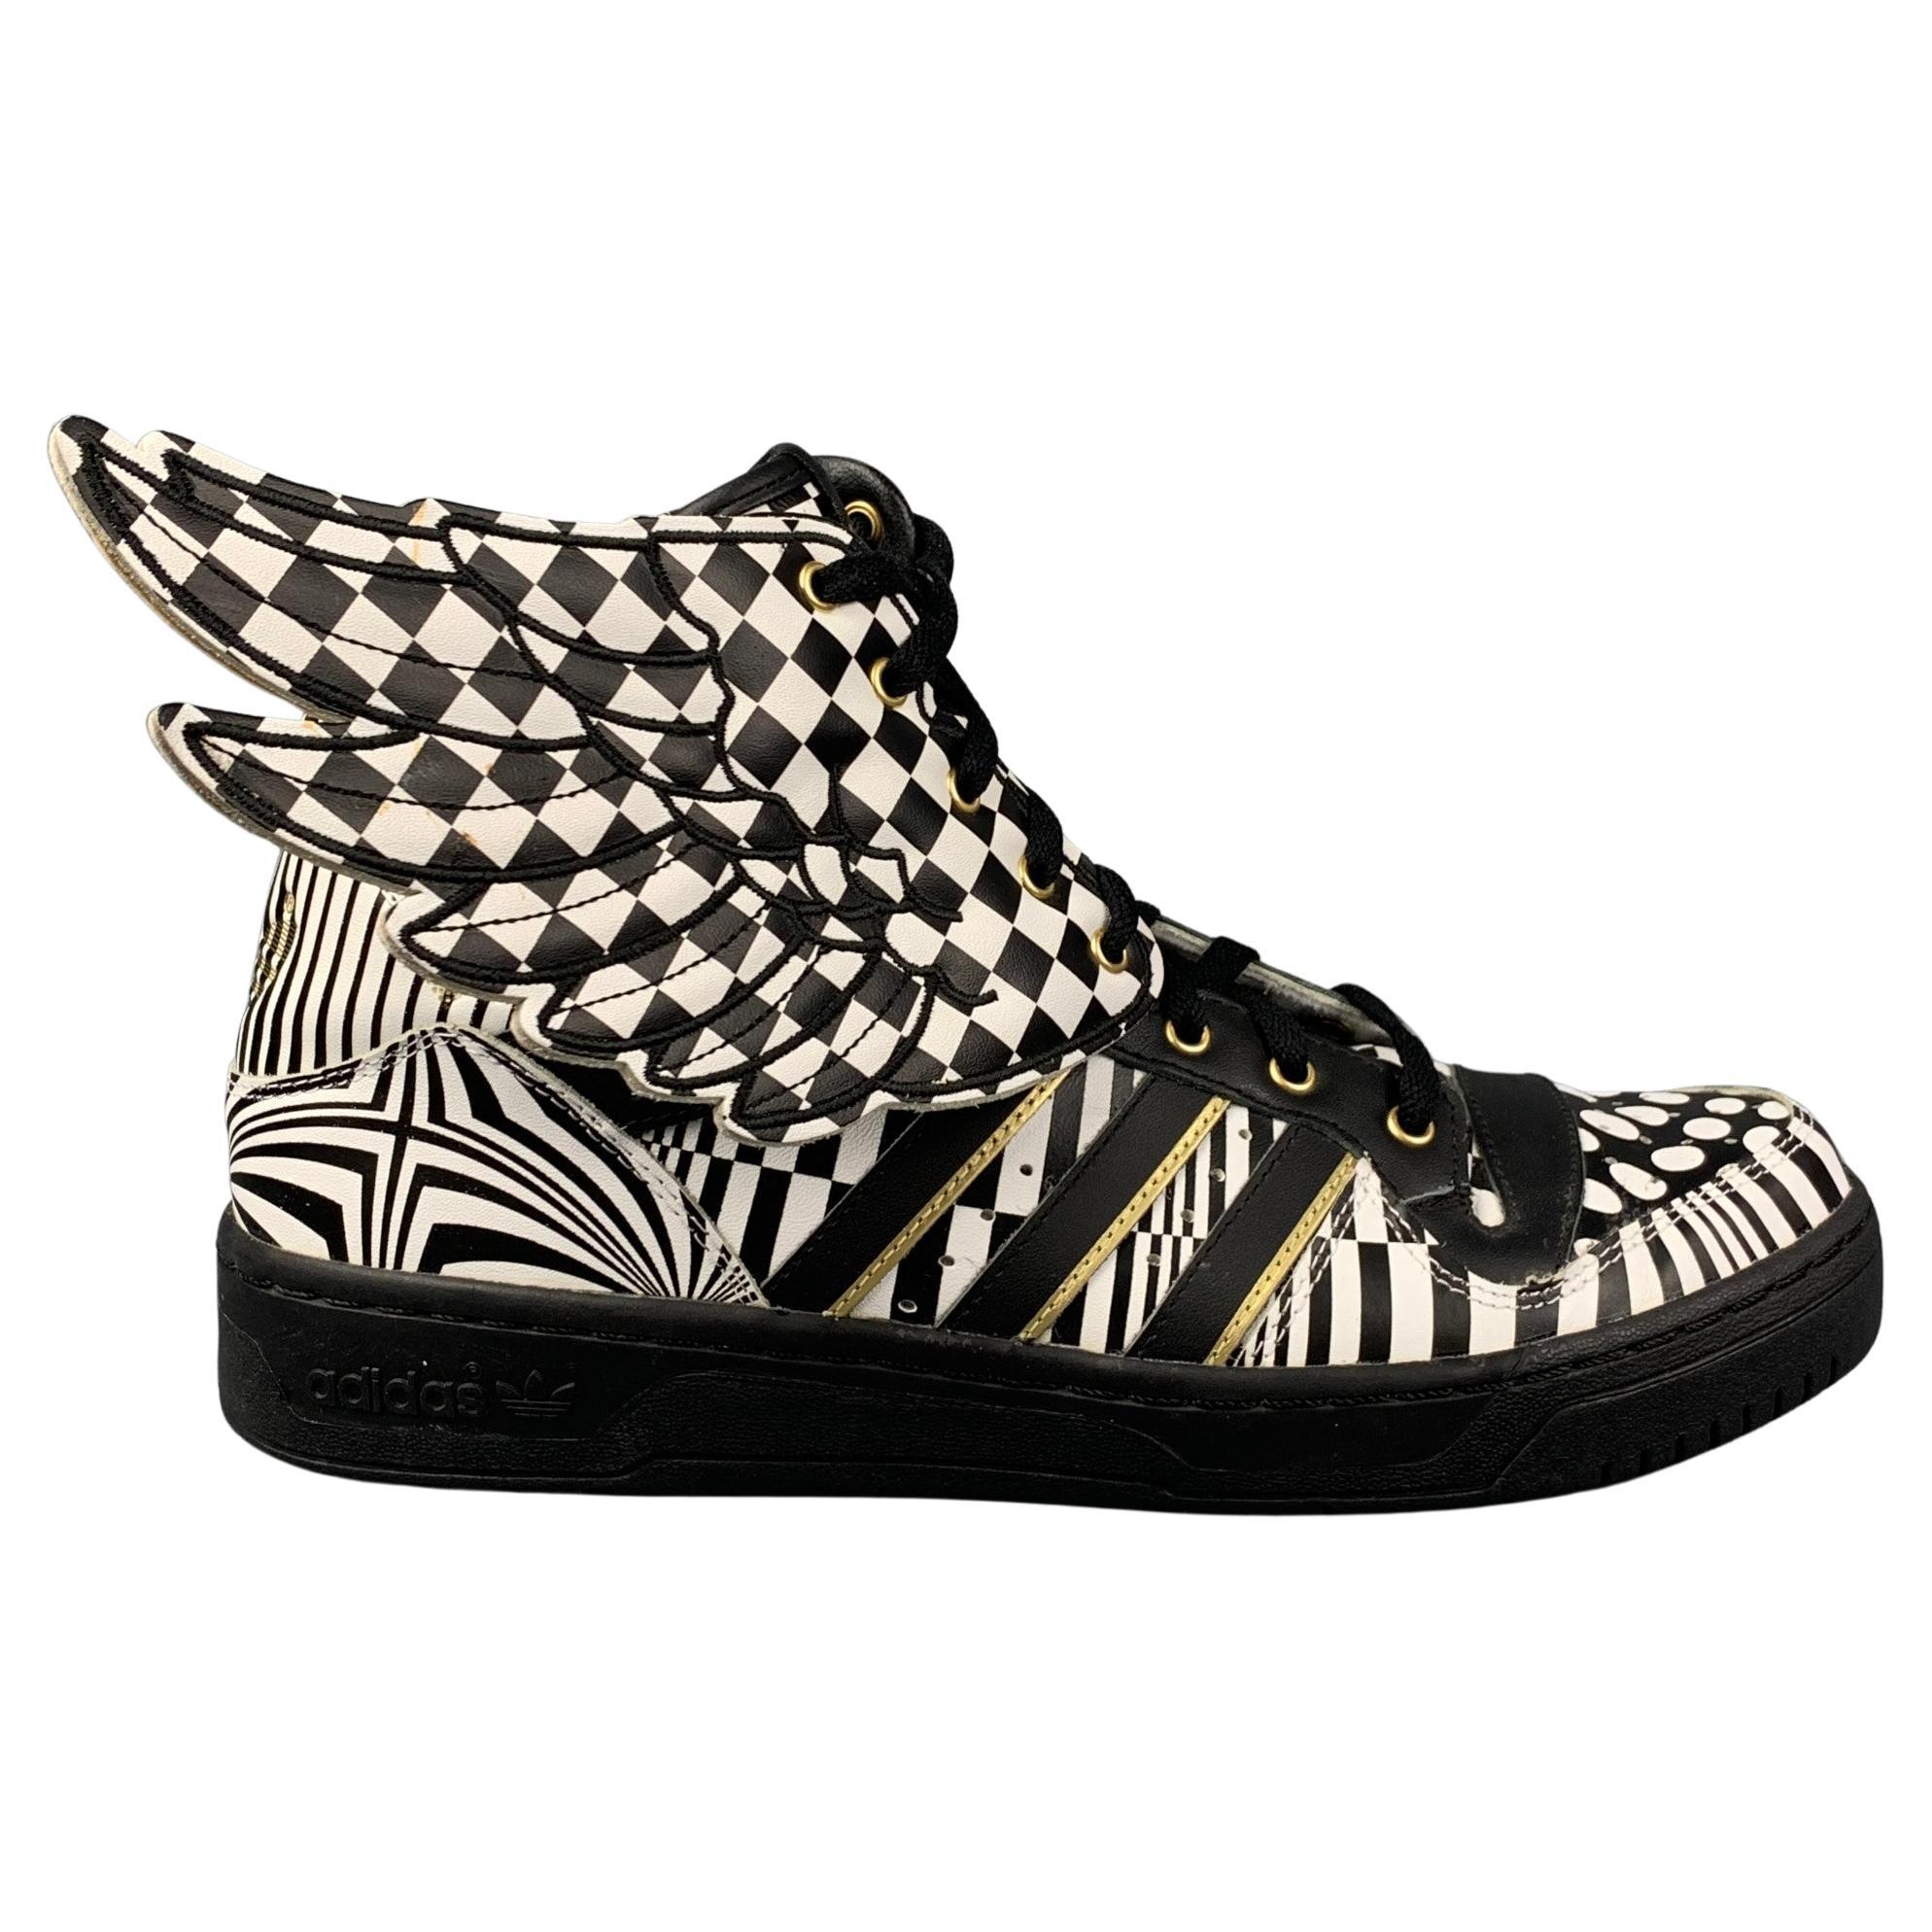 JEREMY SCOTT x ADIDAS Size 12 Black White Leather High Top Wings Opart Sneakers